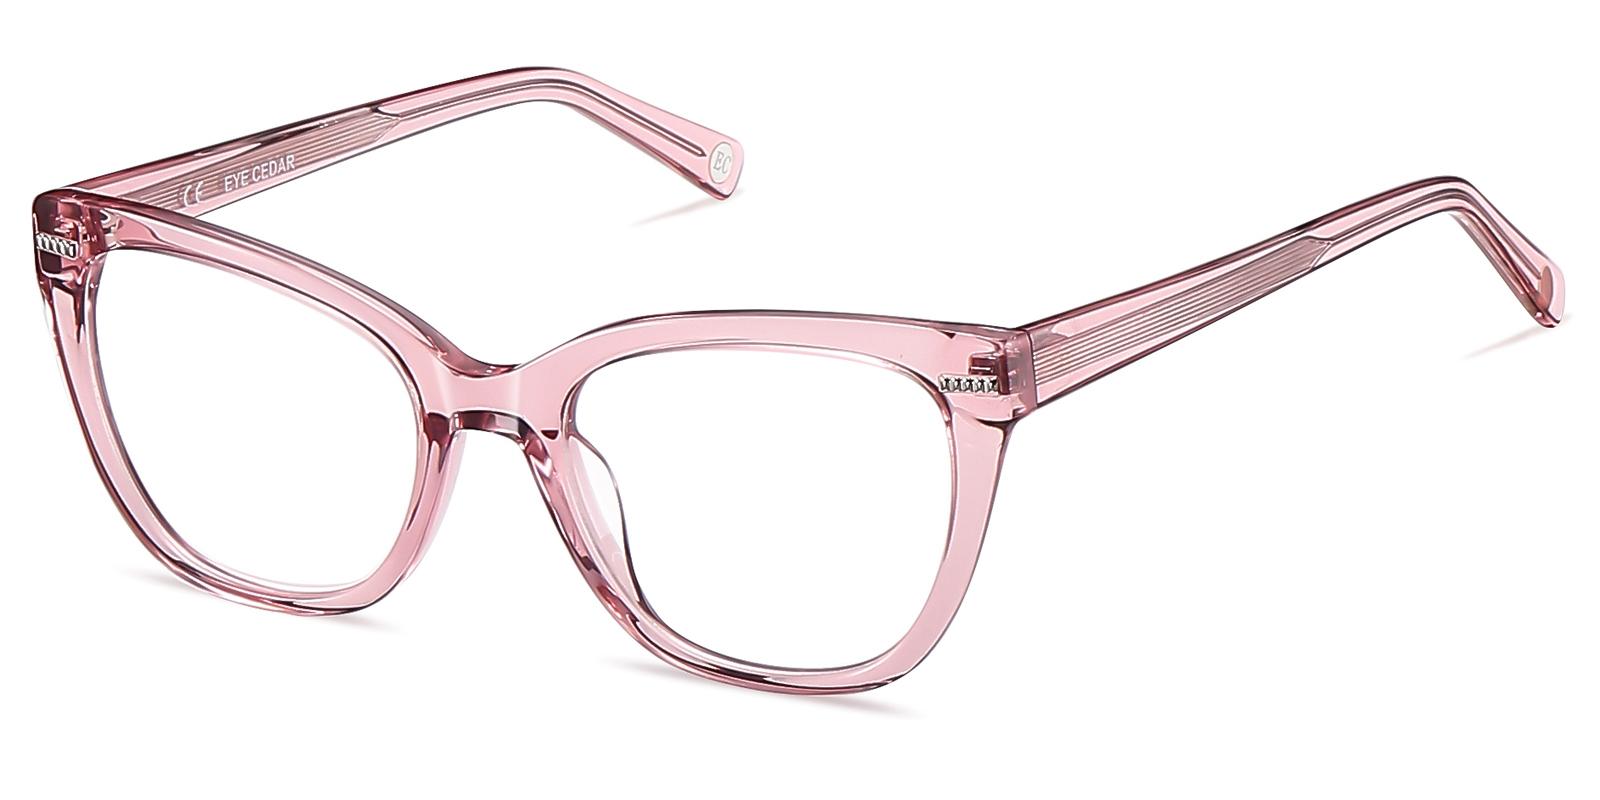 Molia Blue Light Blocking Glasses Women Pink Cat-Eye Style with 1.57 Mid-Index Resin Lenses Computer Glasses